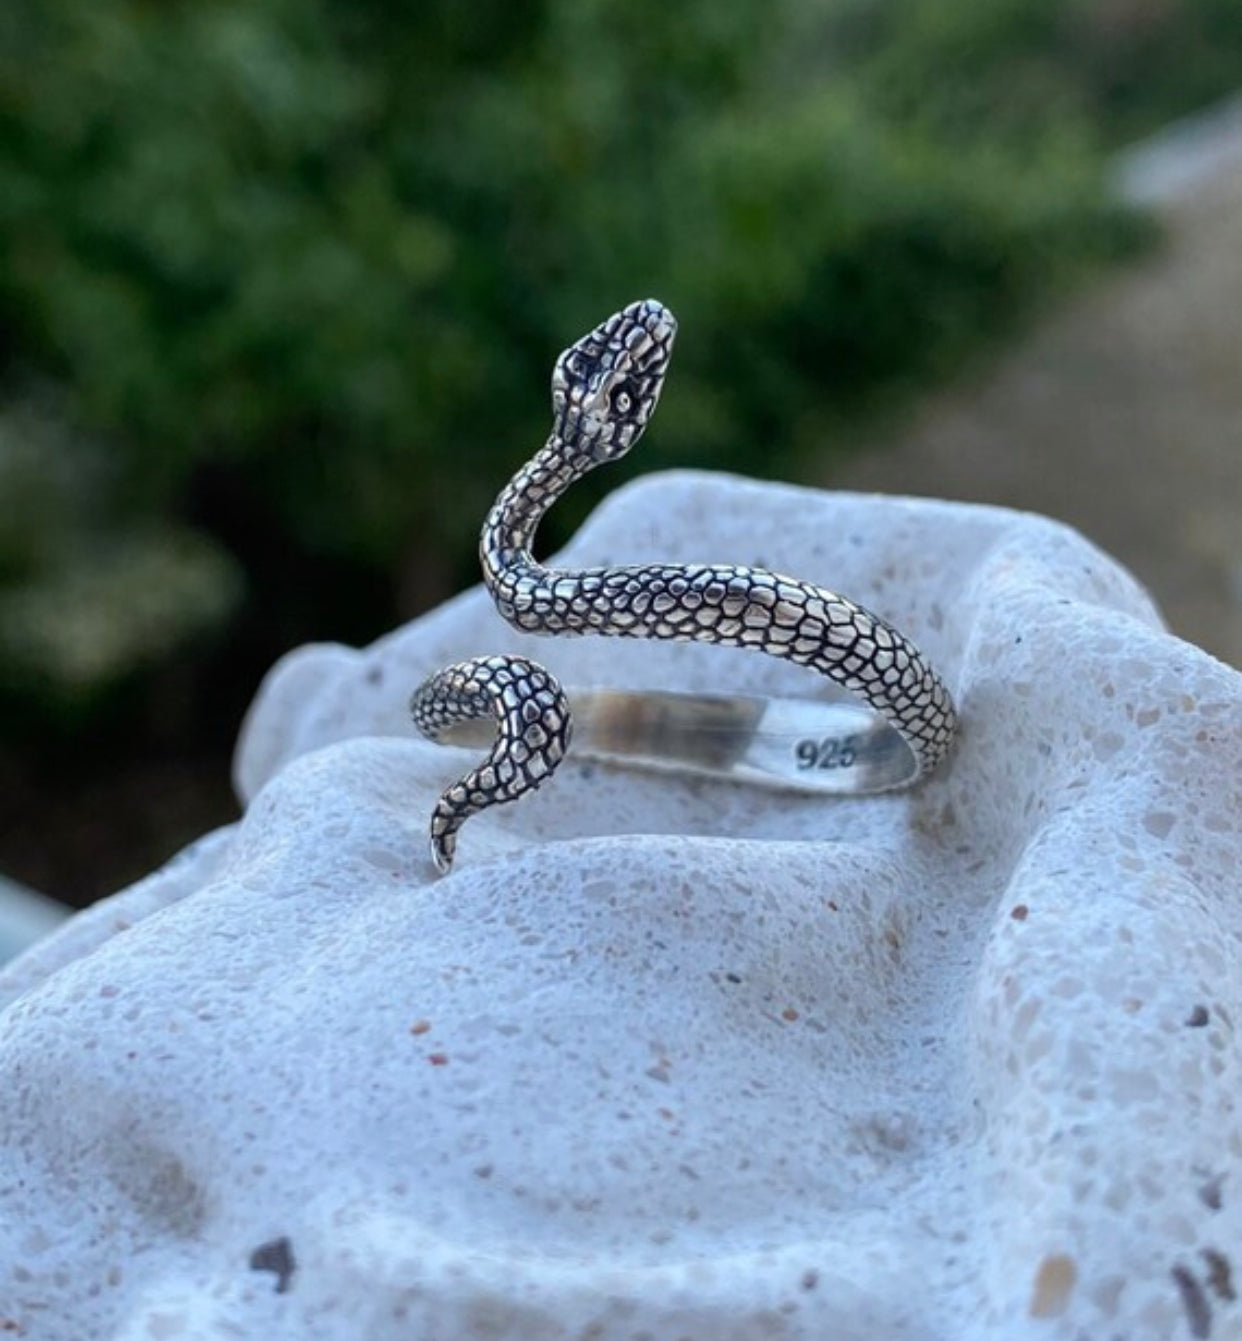 Snake Ring 925 Silver Ring Oxidized Snake Rings Snake Jewelry Punk Ring Silver 9